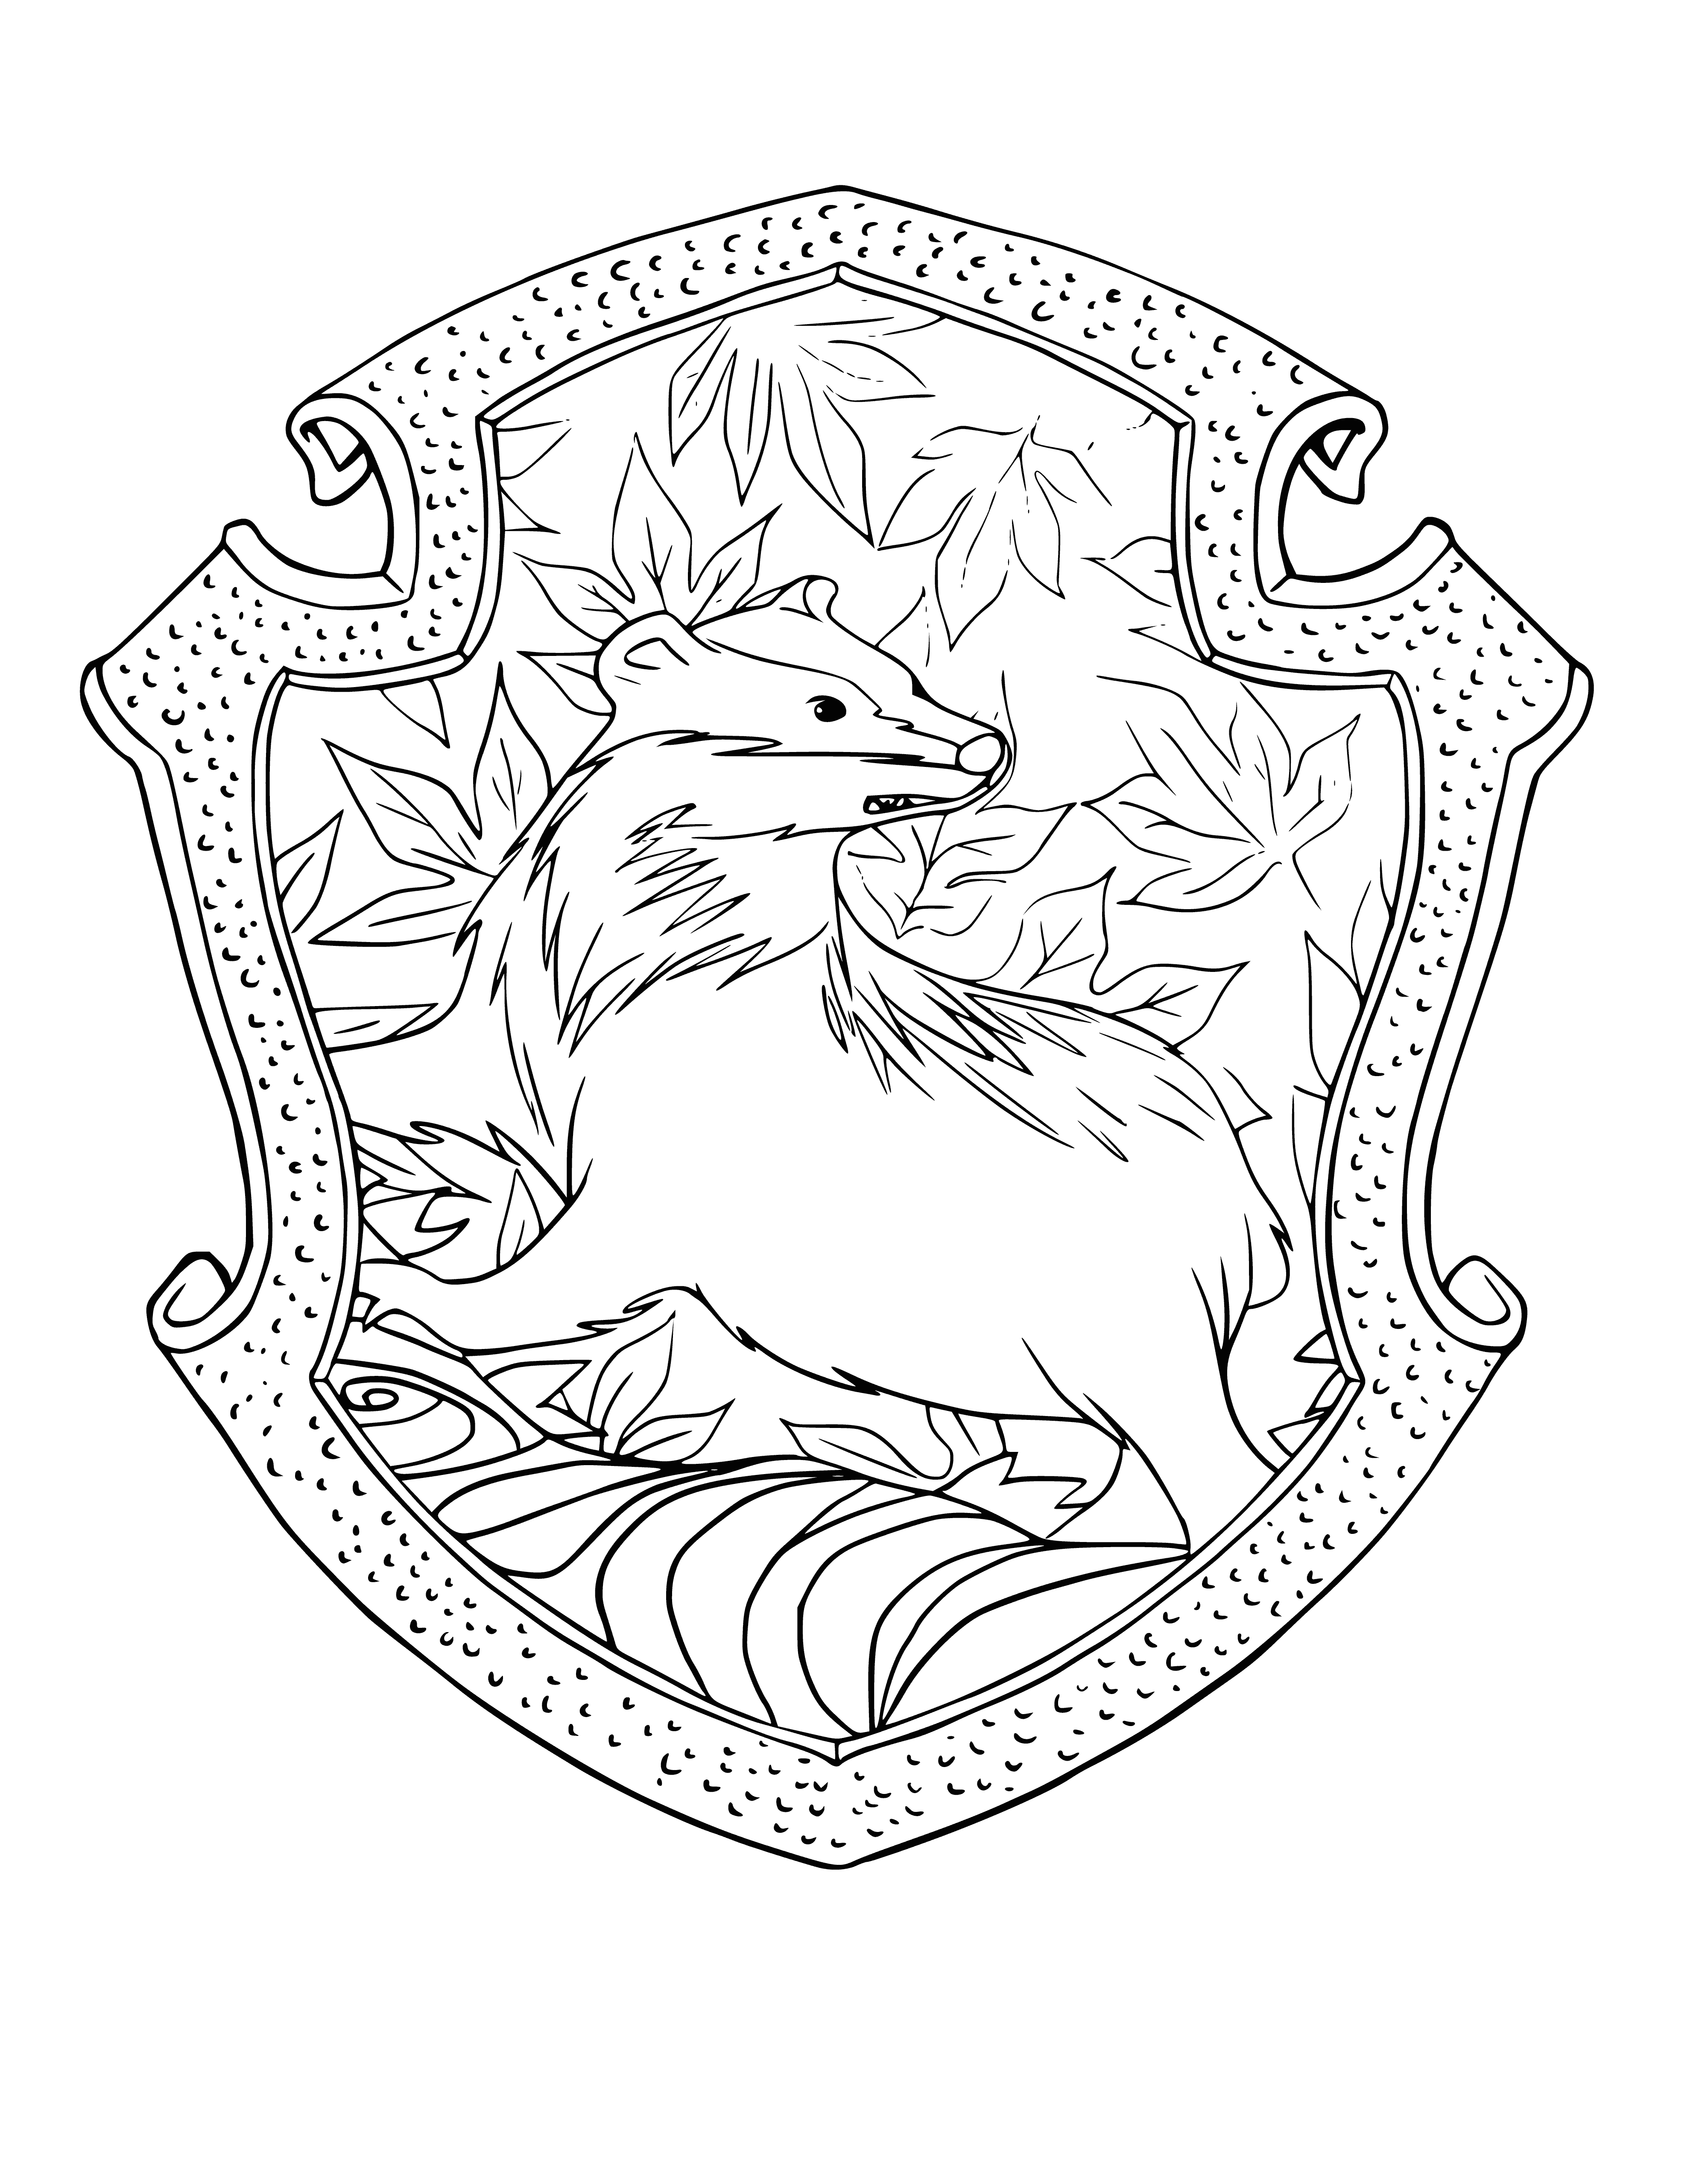 Hufflepuff Faculty Emblem coloring page